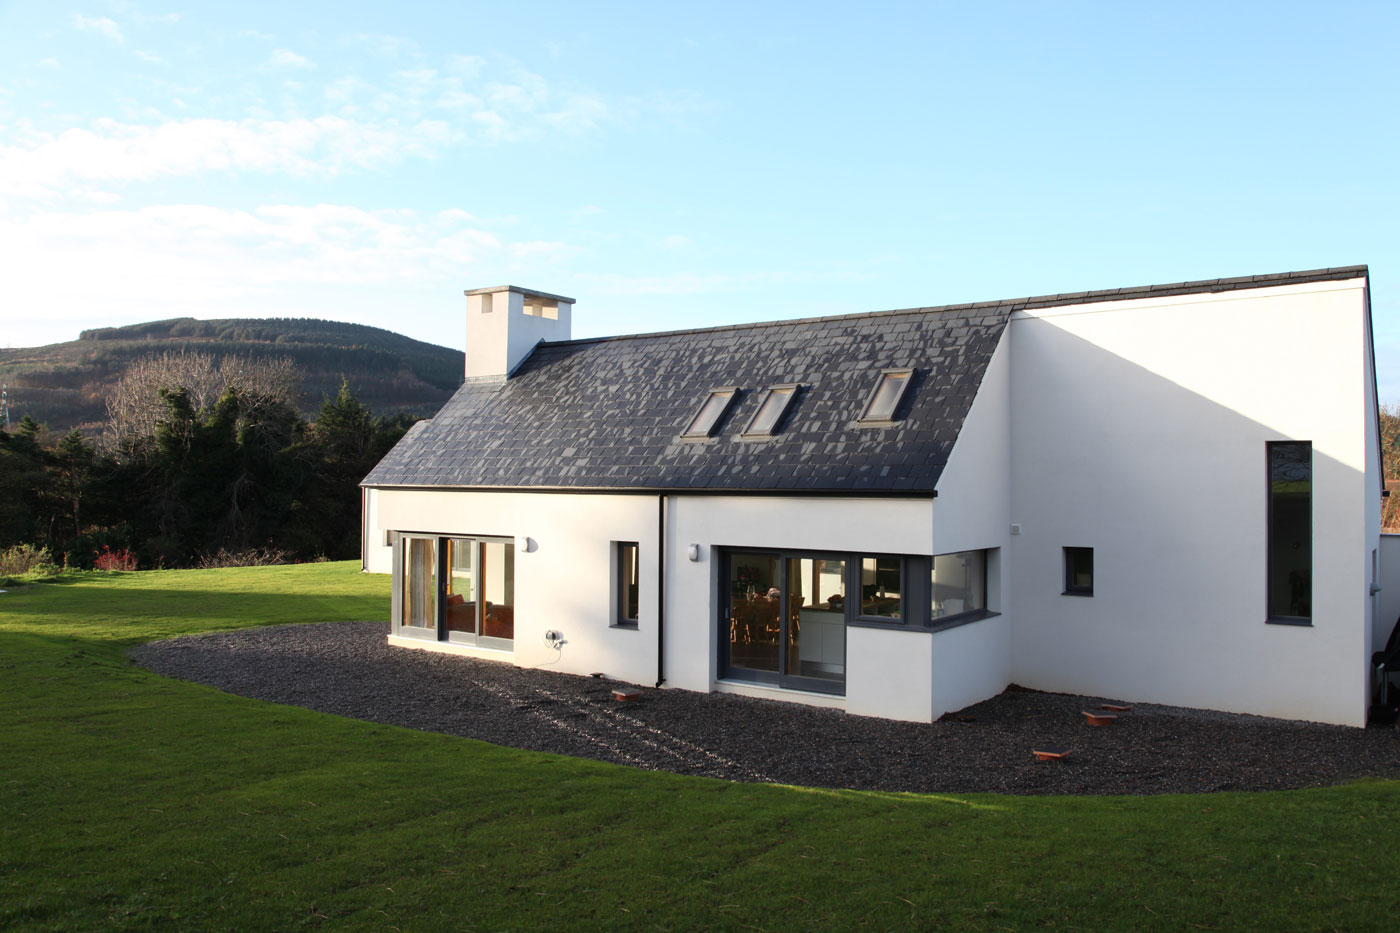 This new home is located on a rural site in county Wicklow.